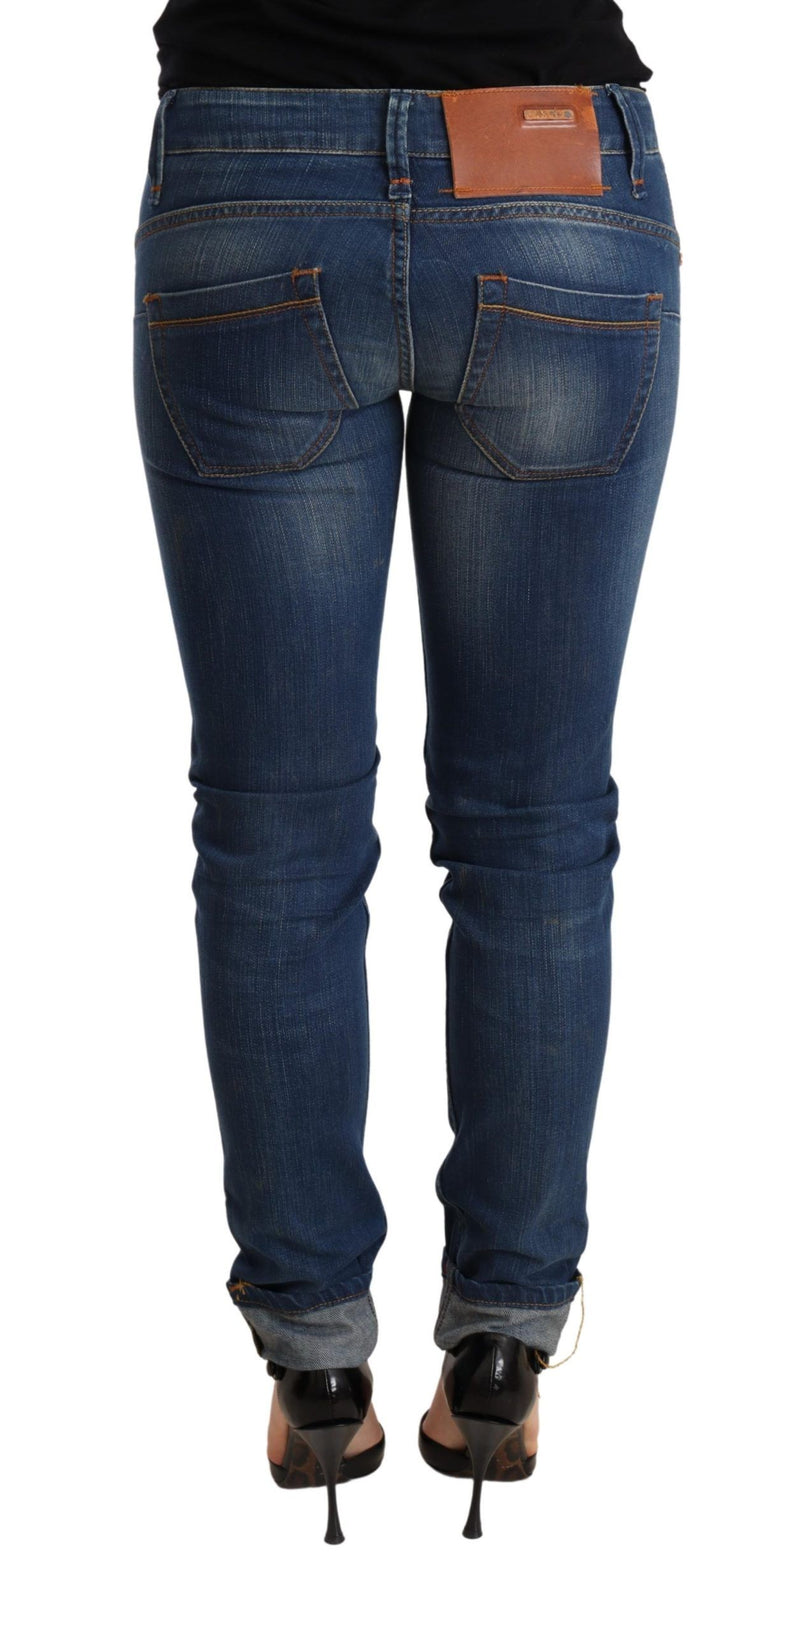 Acht Chic Blue Washed Push-Up Skinny Women's Jeans